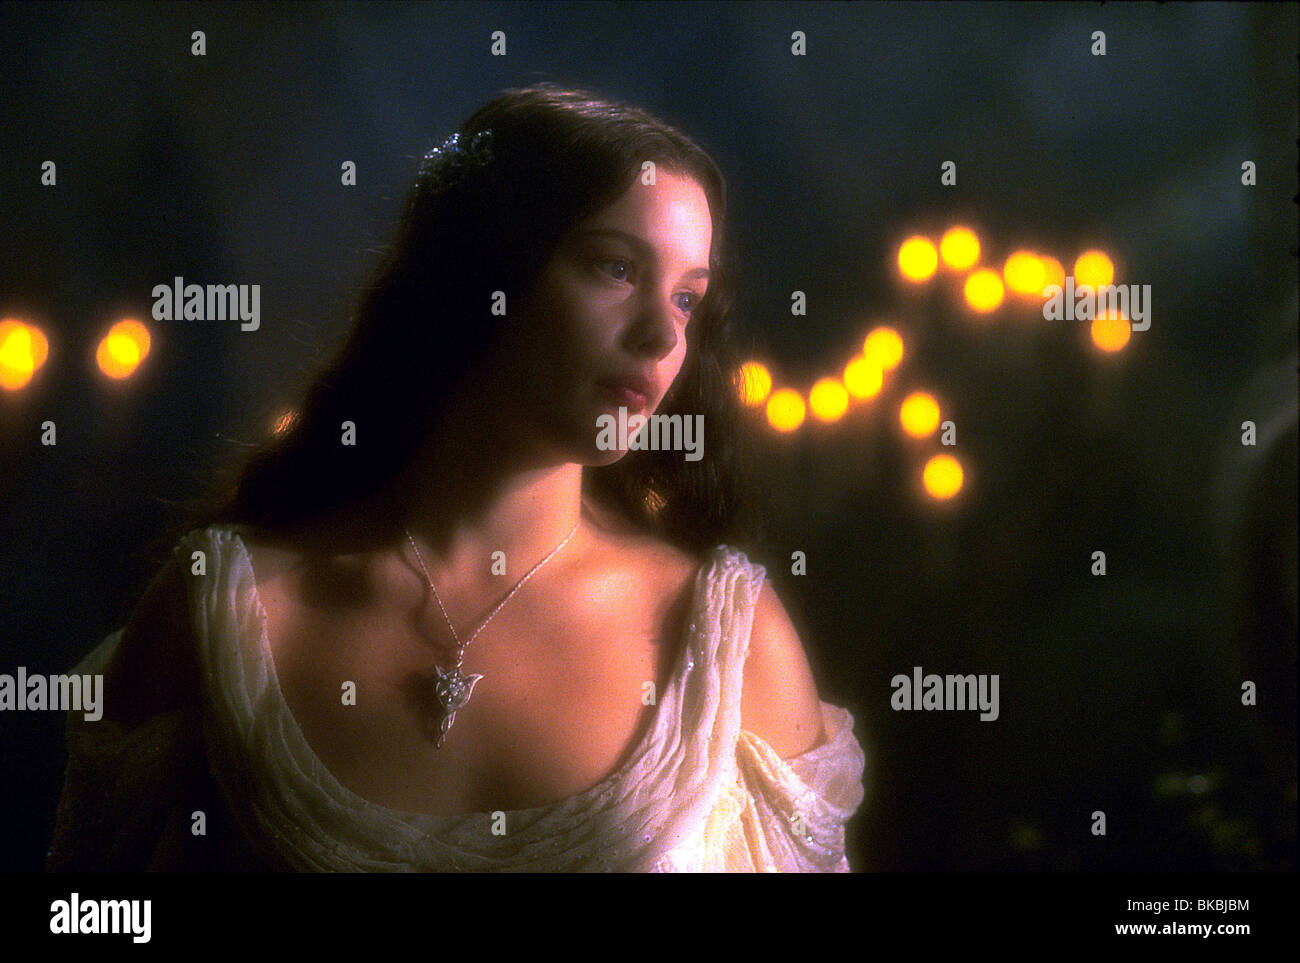 THE LORD OF THE RINGS: THE FELLOWSHIP OF THE RING (2001) LIV TYLER, ARWEN FOTR 001-21 Stock Photo